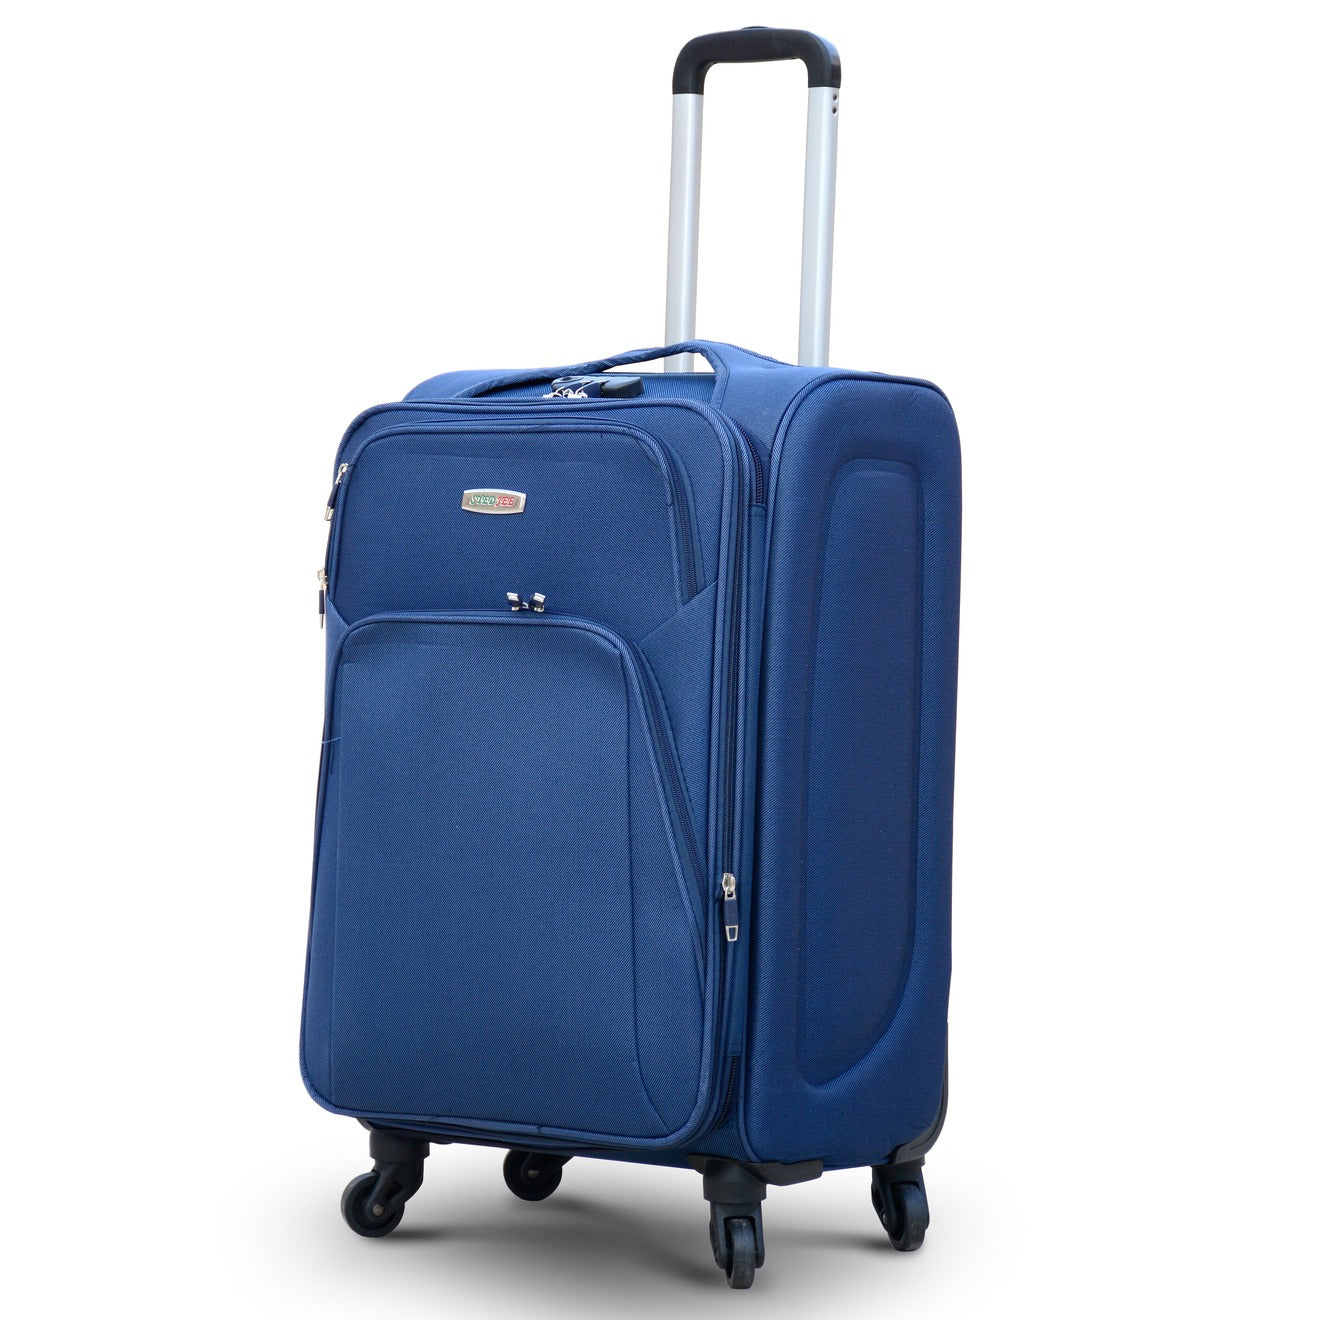 4 Pcs Full Set 20” 24” 28" 32 Inches Blue 4 Wheels Soft Material Luggage Lightweight Soft Shell